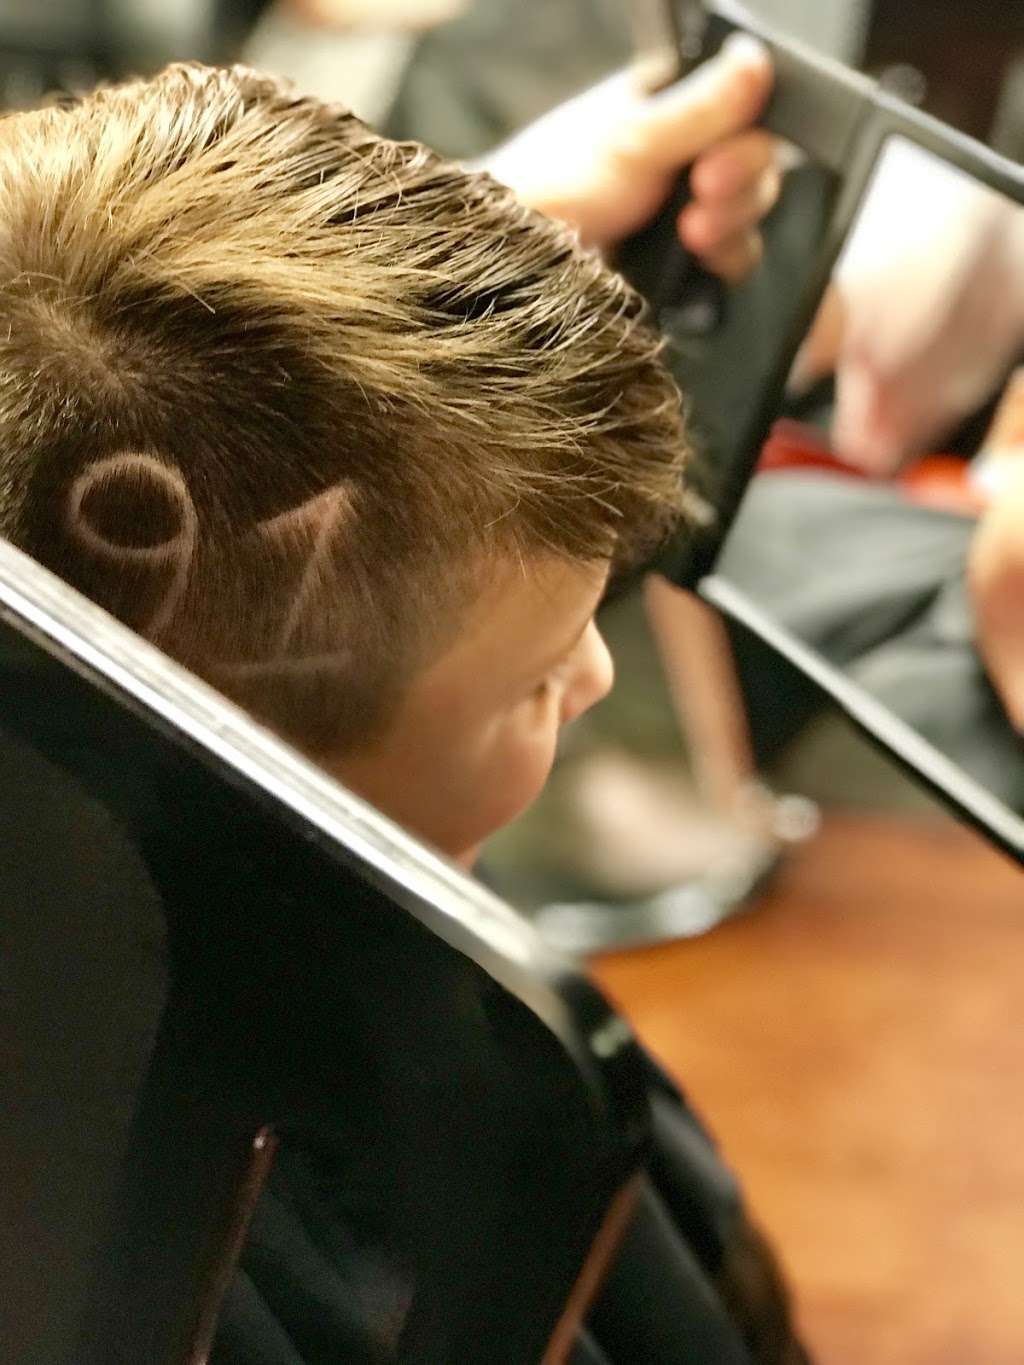 Fades For Days | 8030 Hwy 6 SUITE B, Hitchcock, TX 77563 | Phone: (409) 316-4724